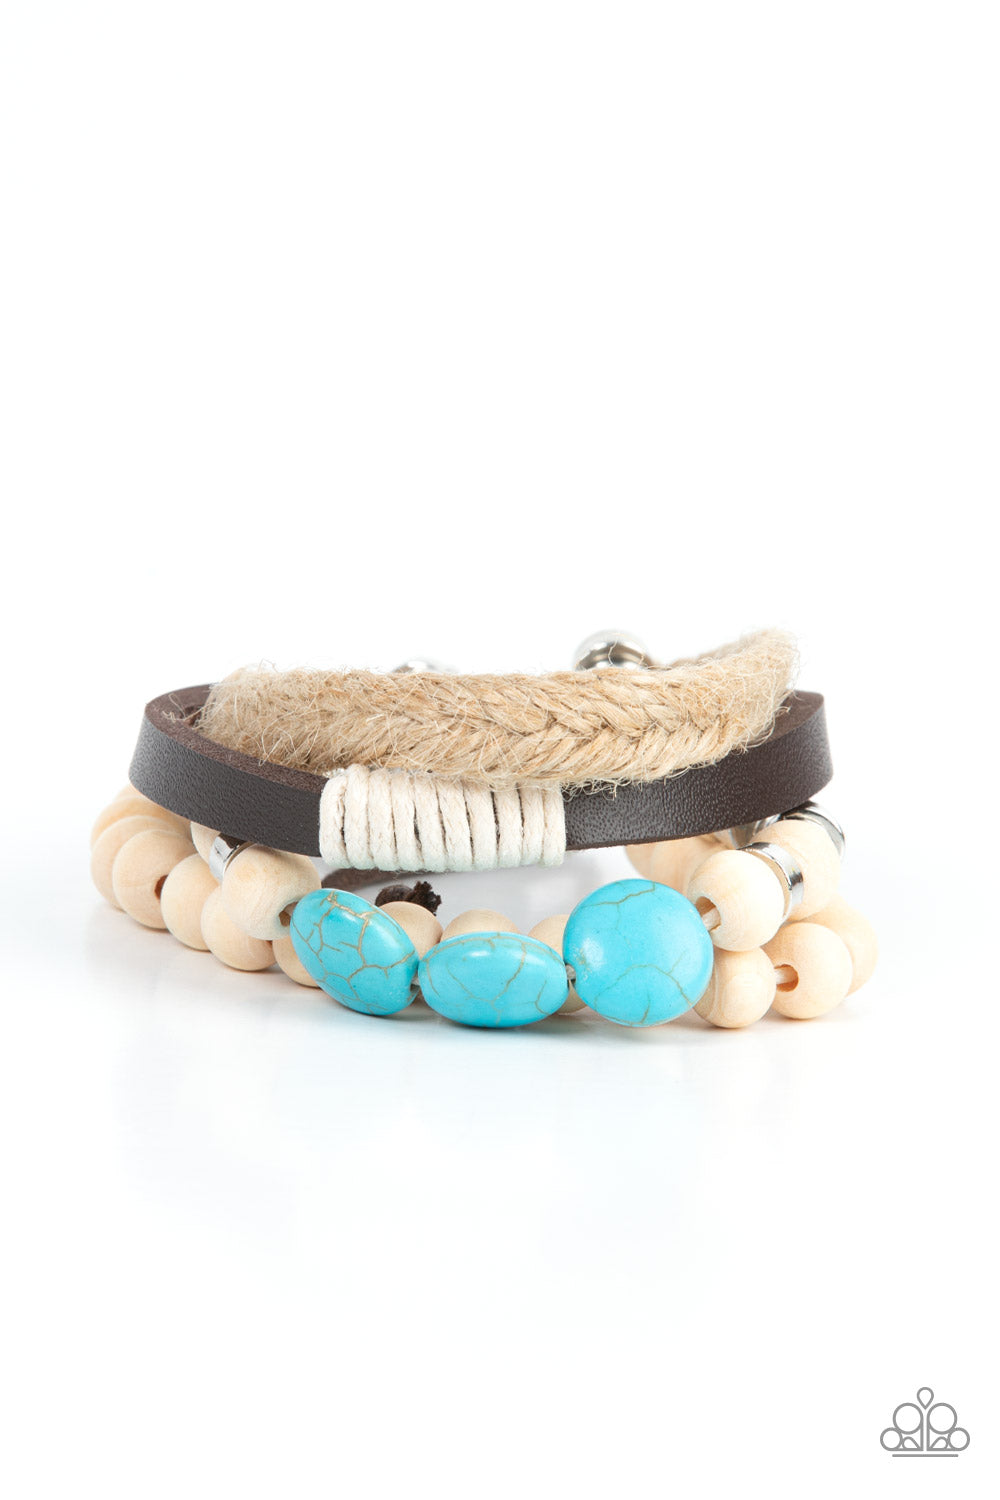 DRIFTER Away - Blue/Turquoise Stones, White Wooden Beads, Silver Beads, Brown Leather, & Twine Paparazzi Urban Bracelet